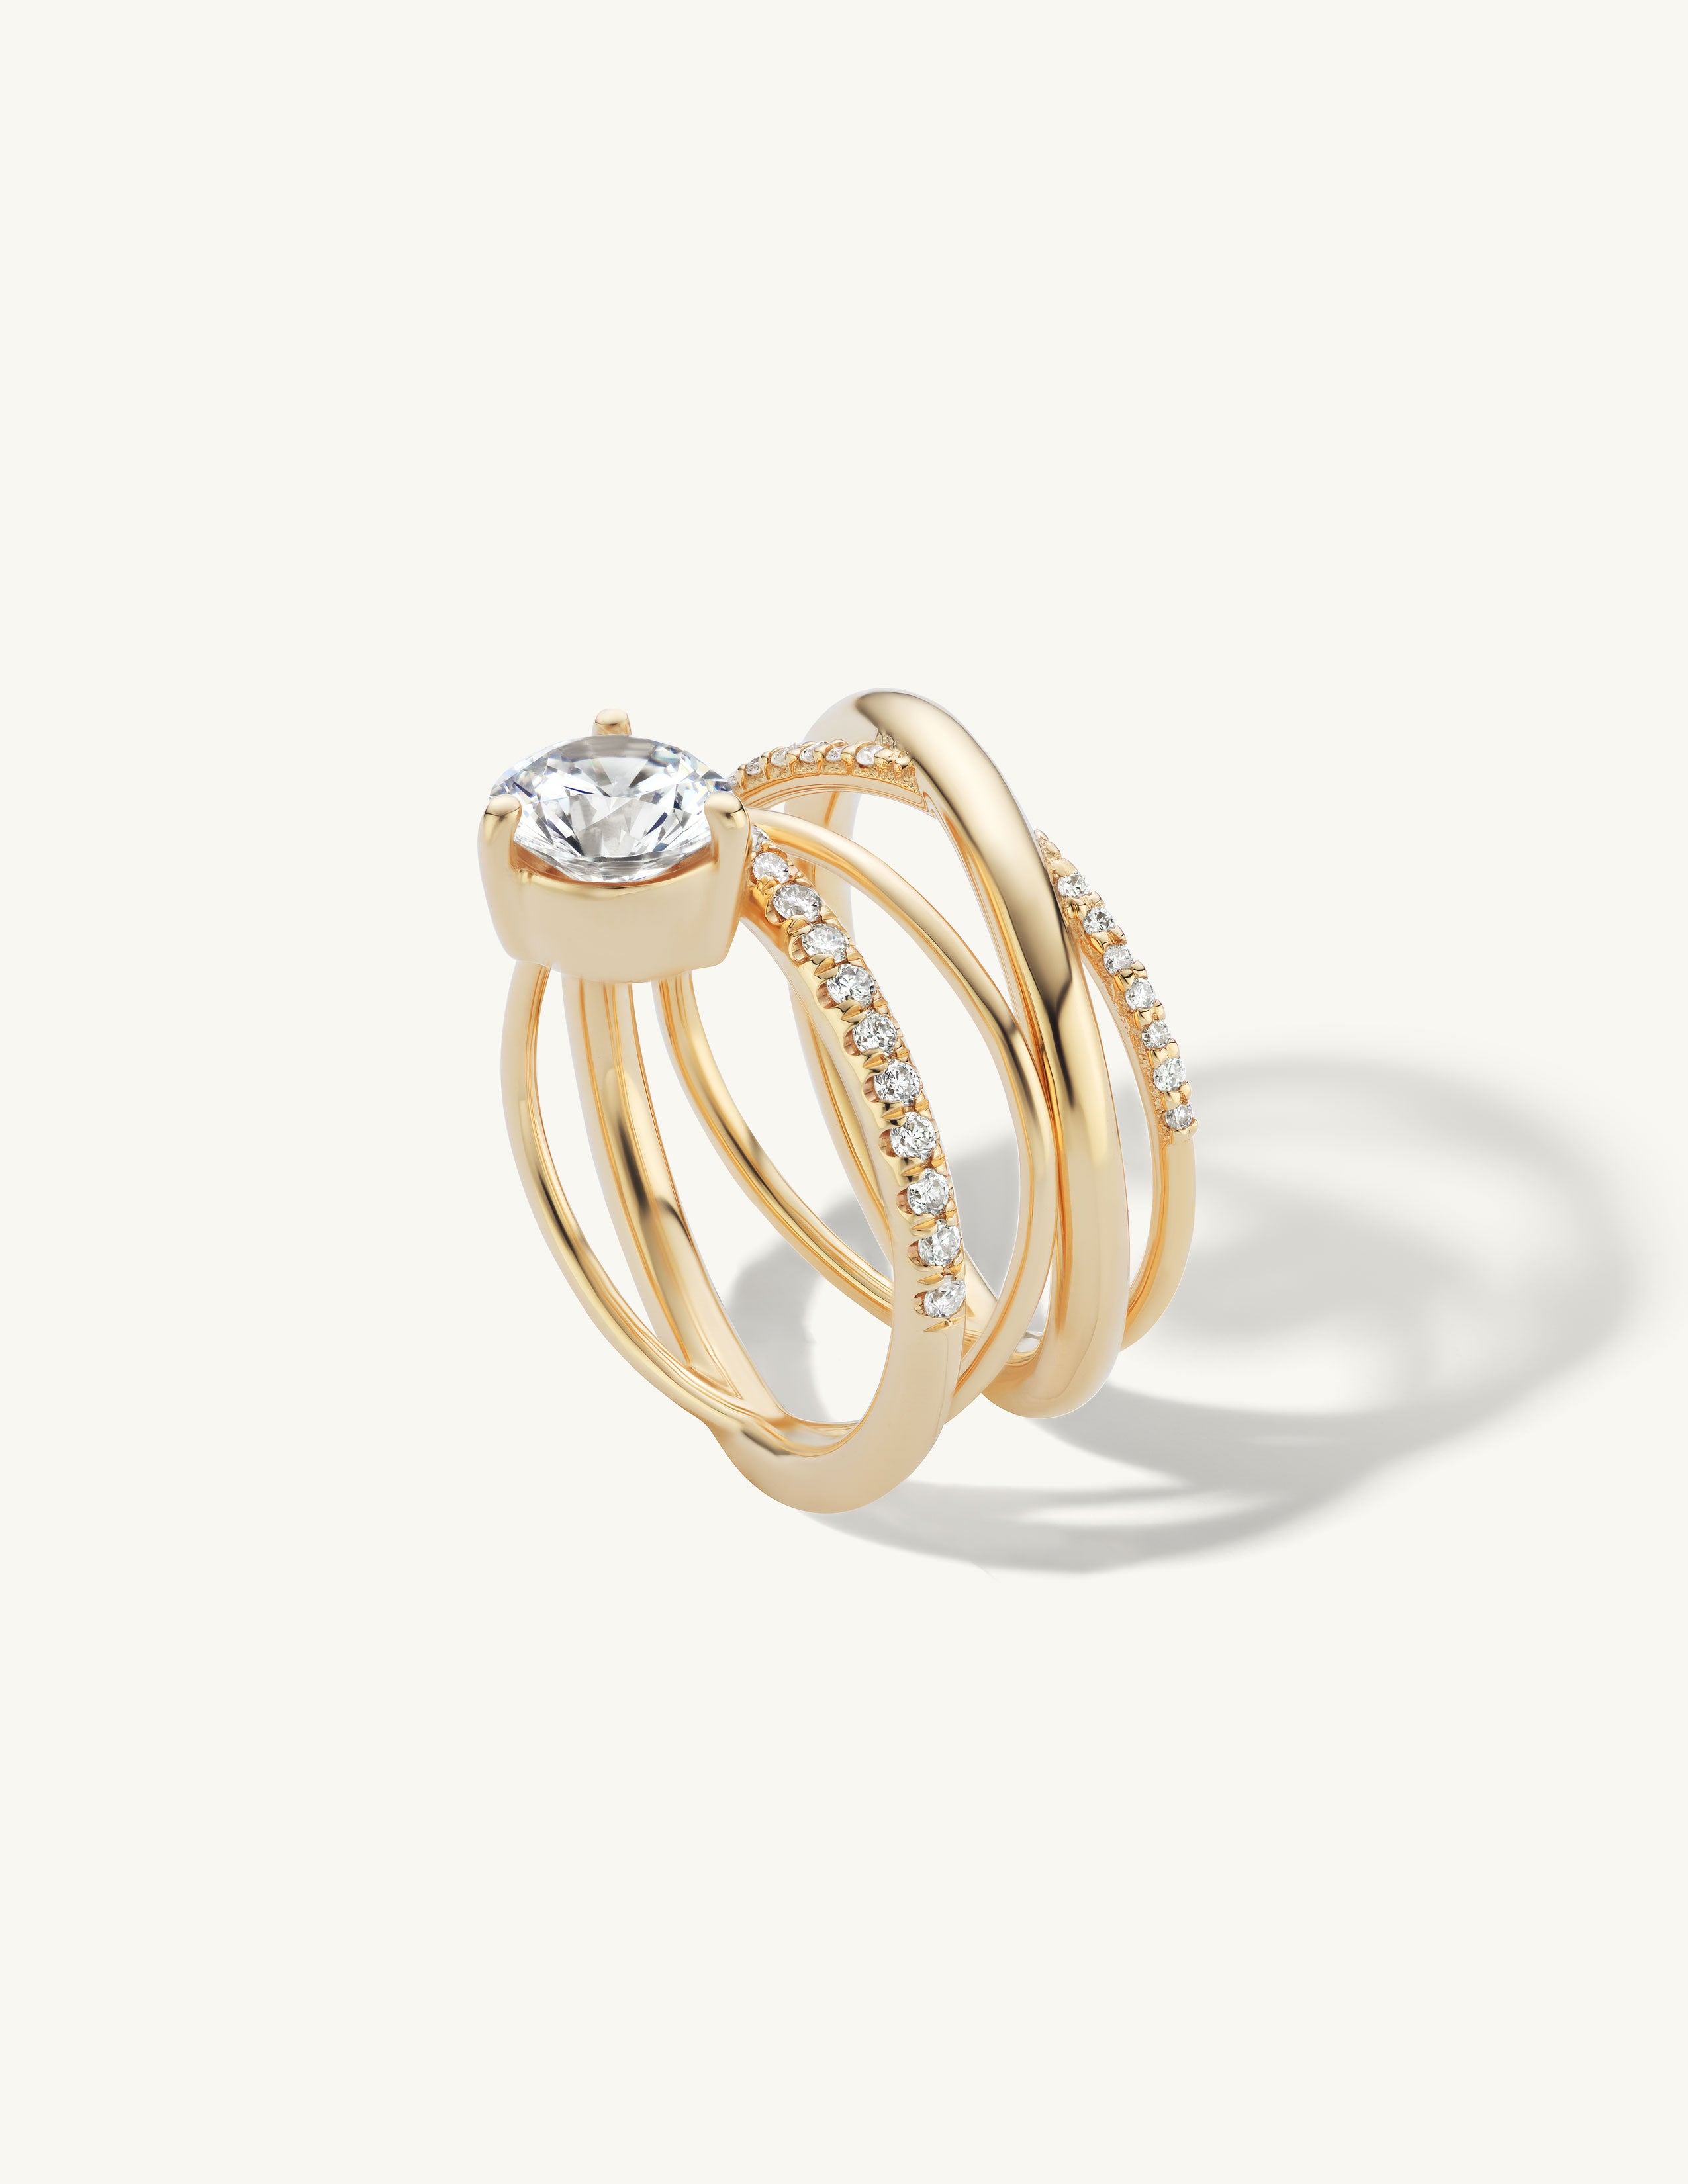 Half Pave Crossover Engagement Ring